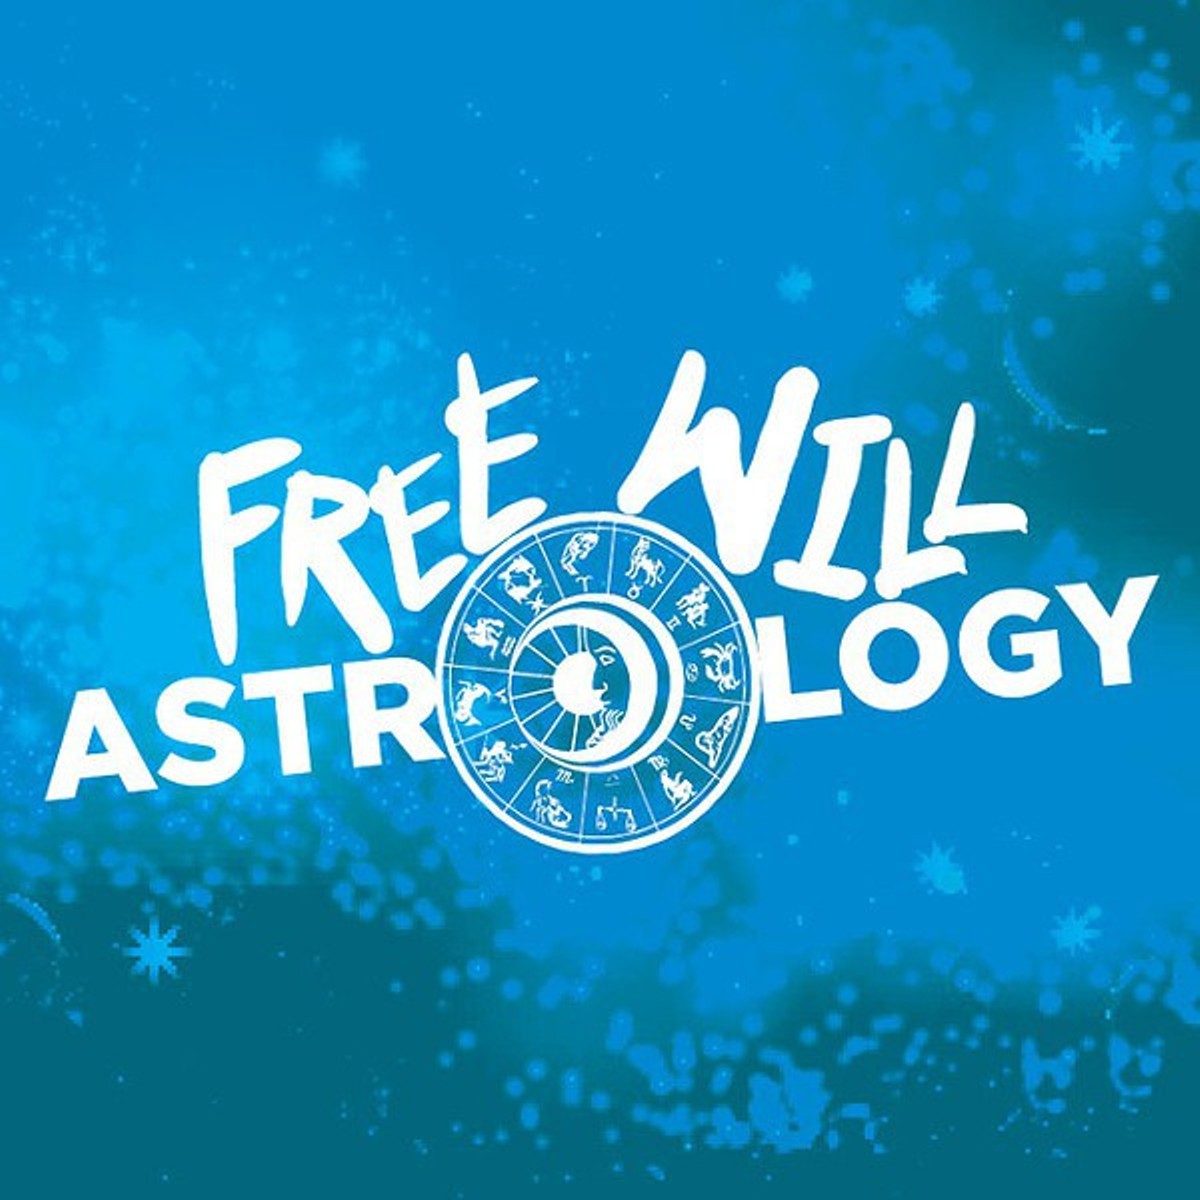 Free Will Astrology (10/28/15)